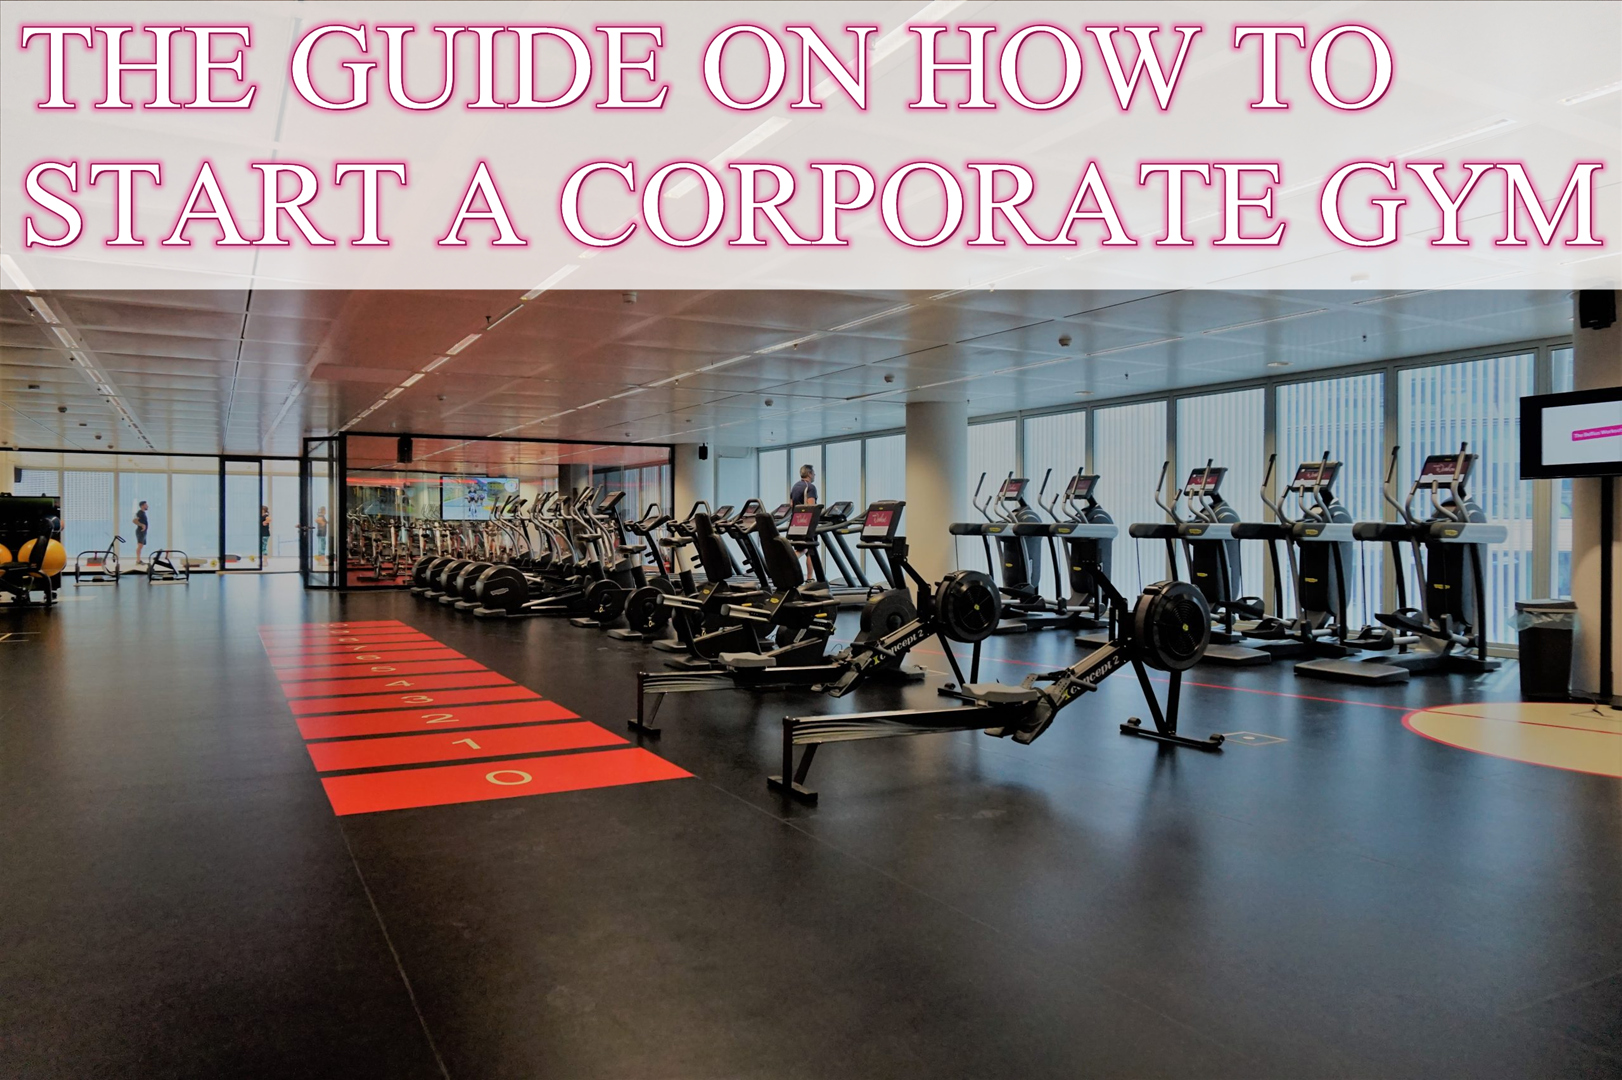 THE GUIDE ON HOW TO START A CORPORATE GYM